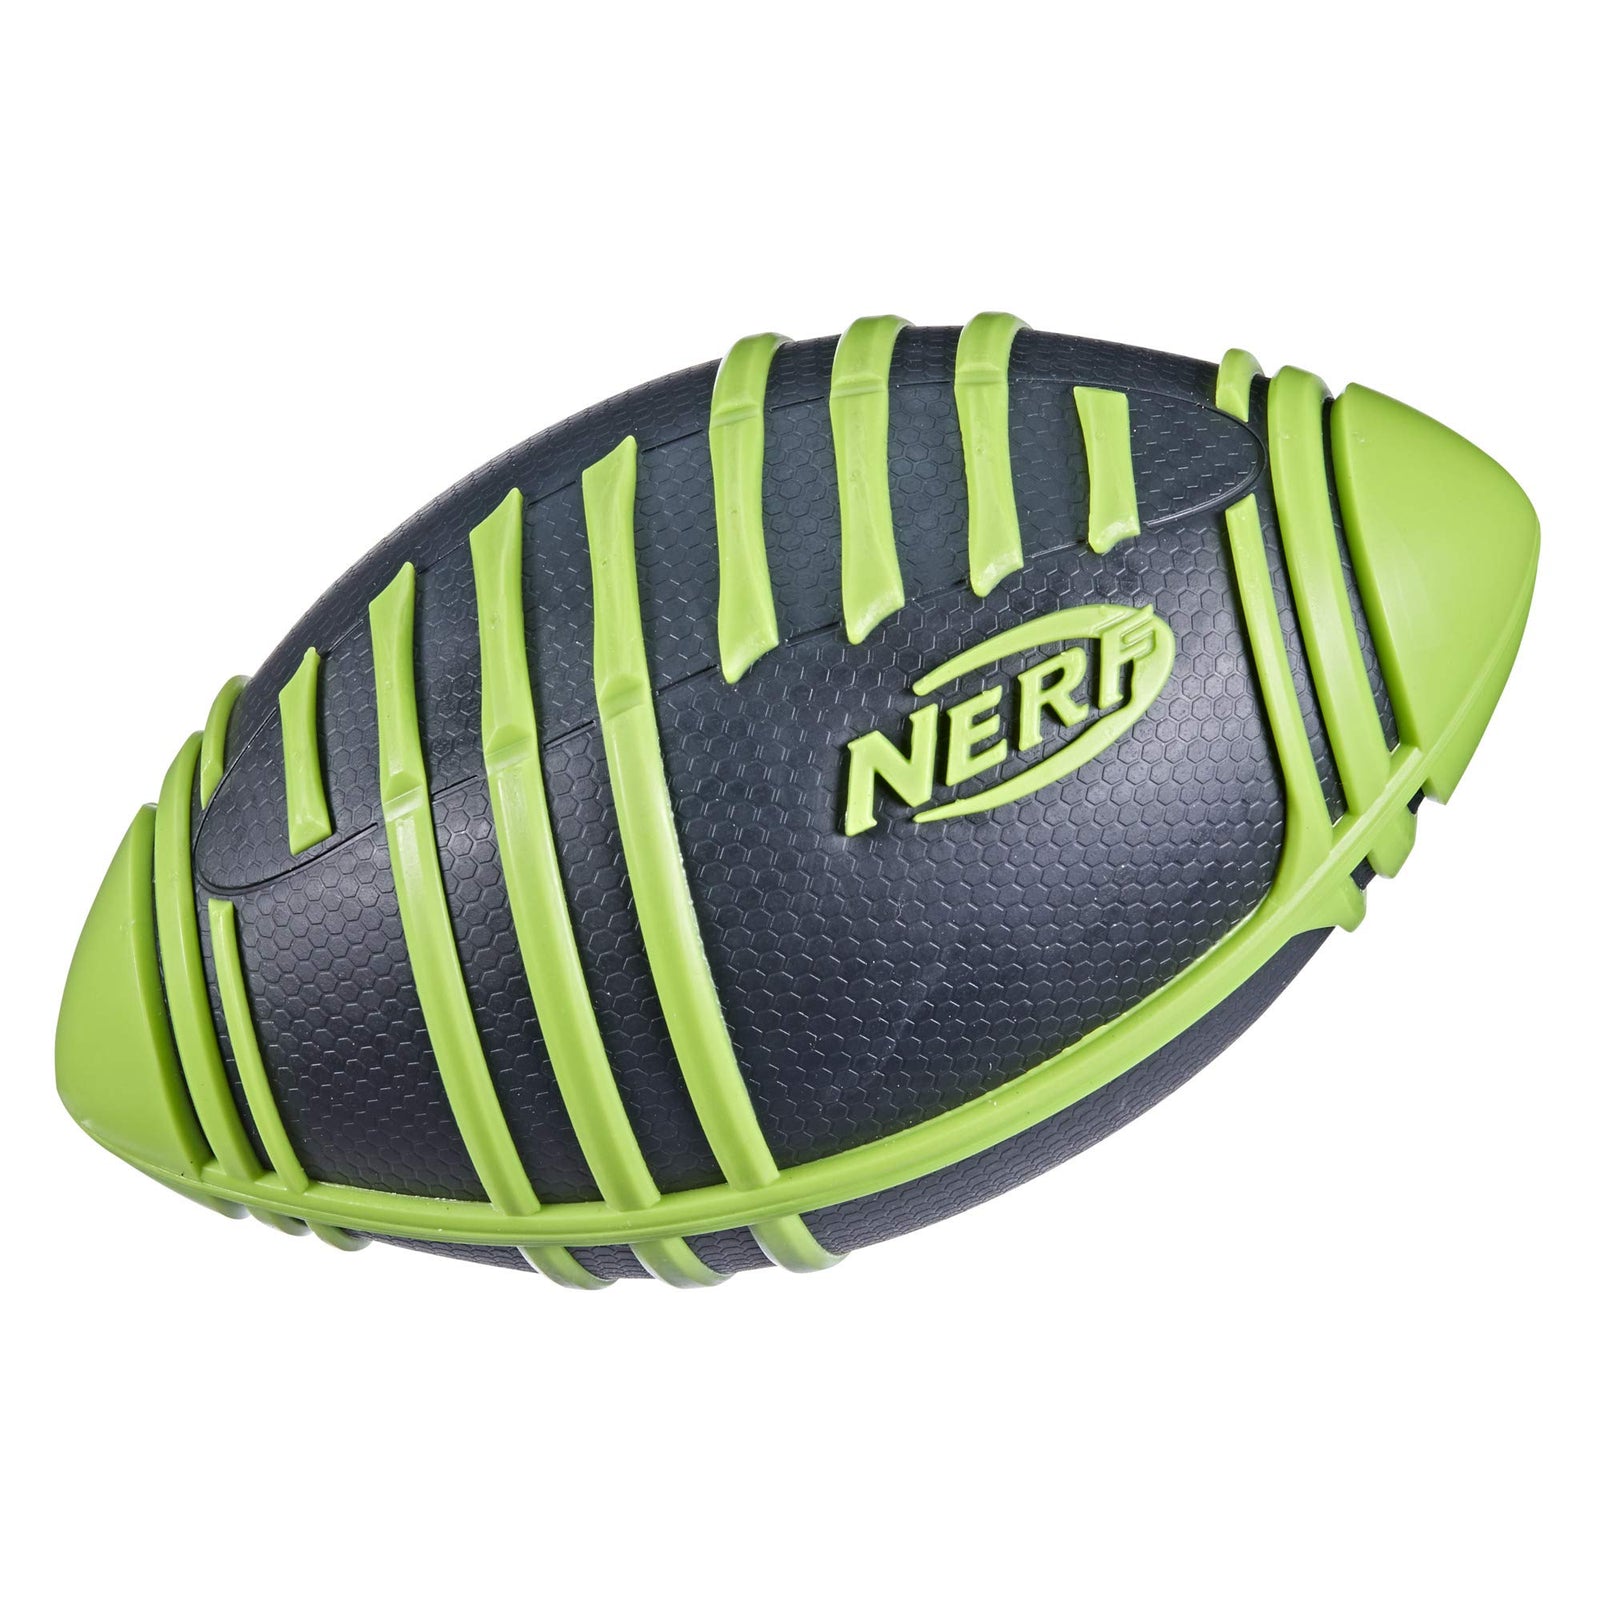 NERF Weather Blitz Foam Football for All-Weather Play -- Easy-to-Hold Grips – Great for Indoor and Outdoor Games -- Green